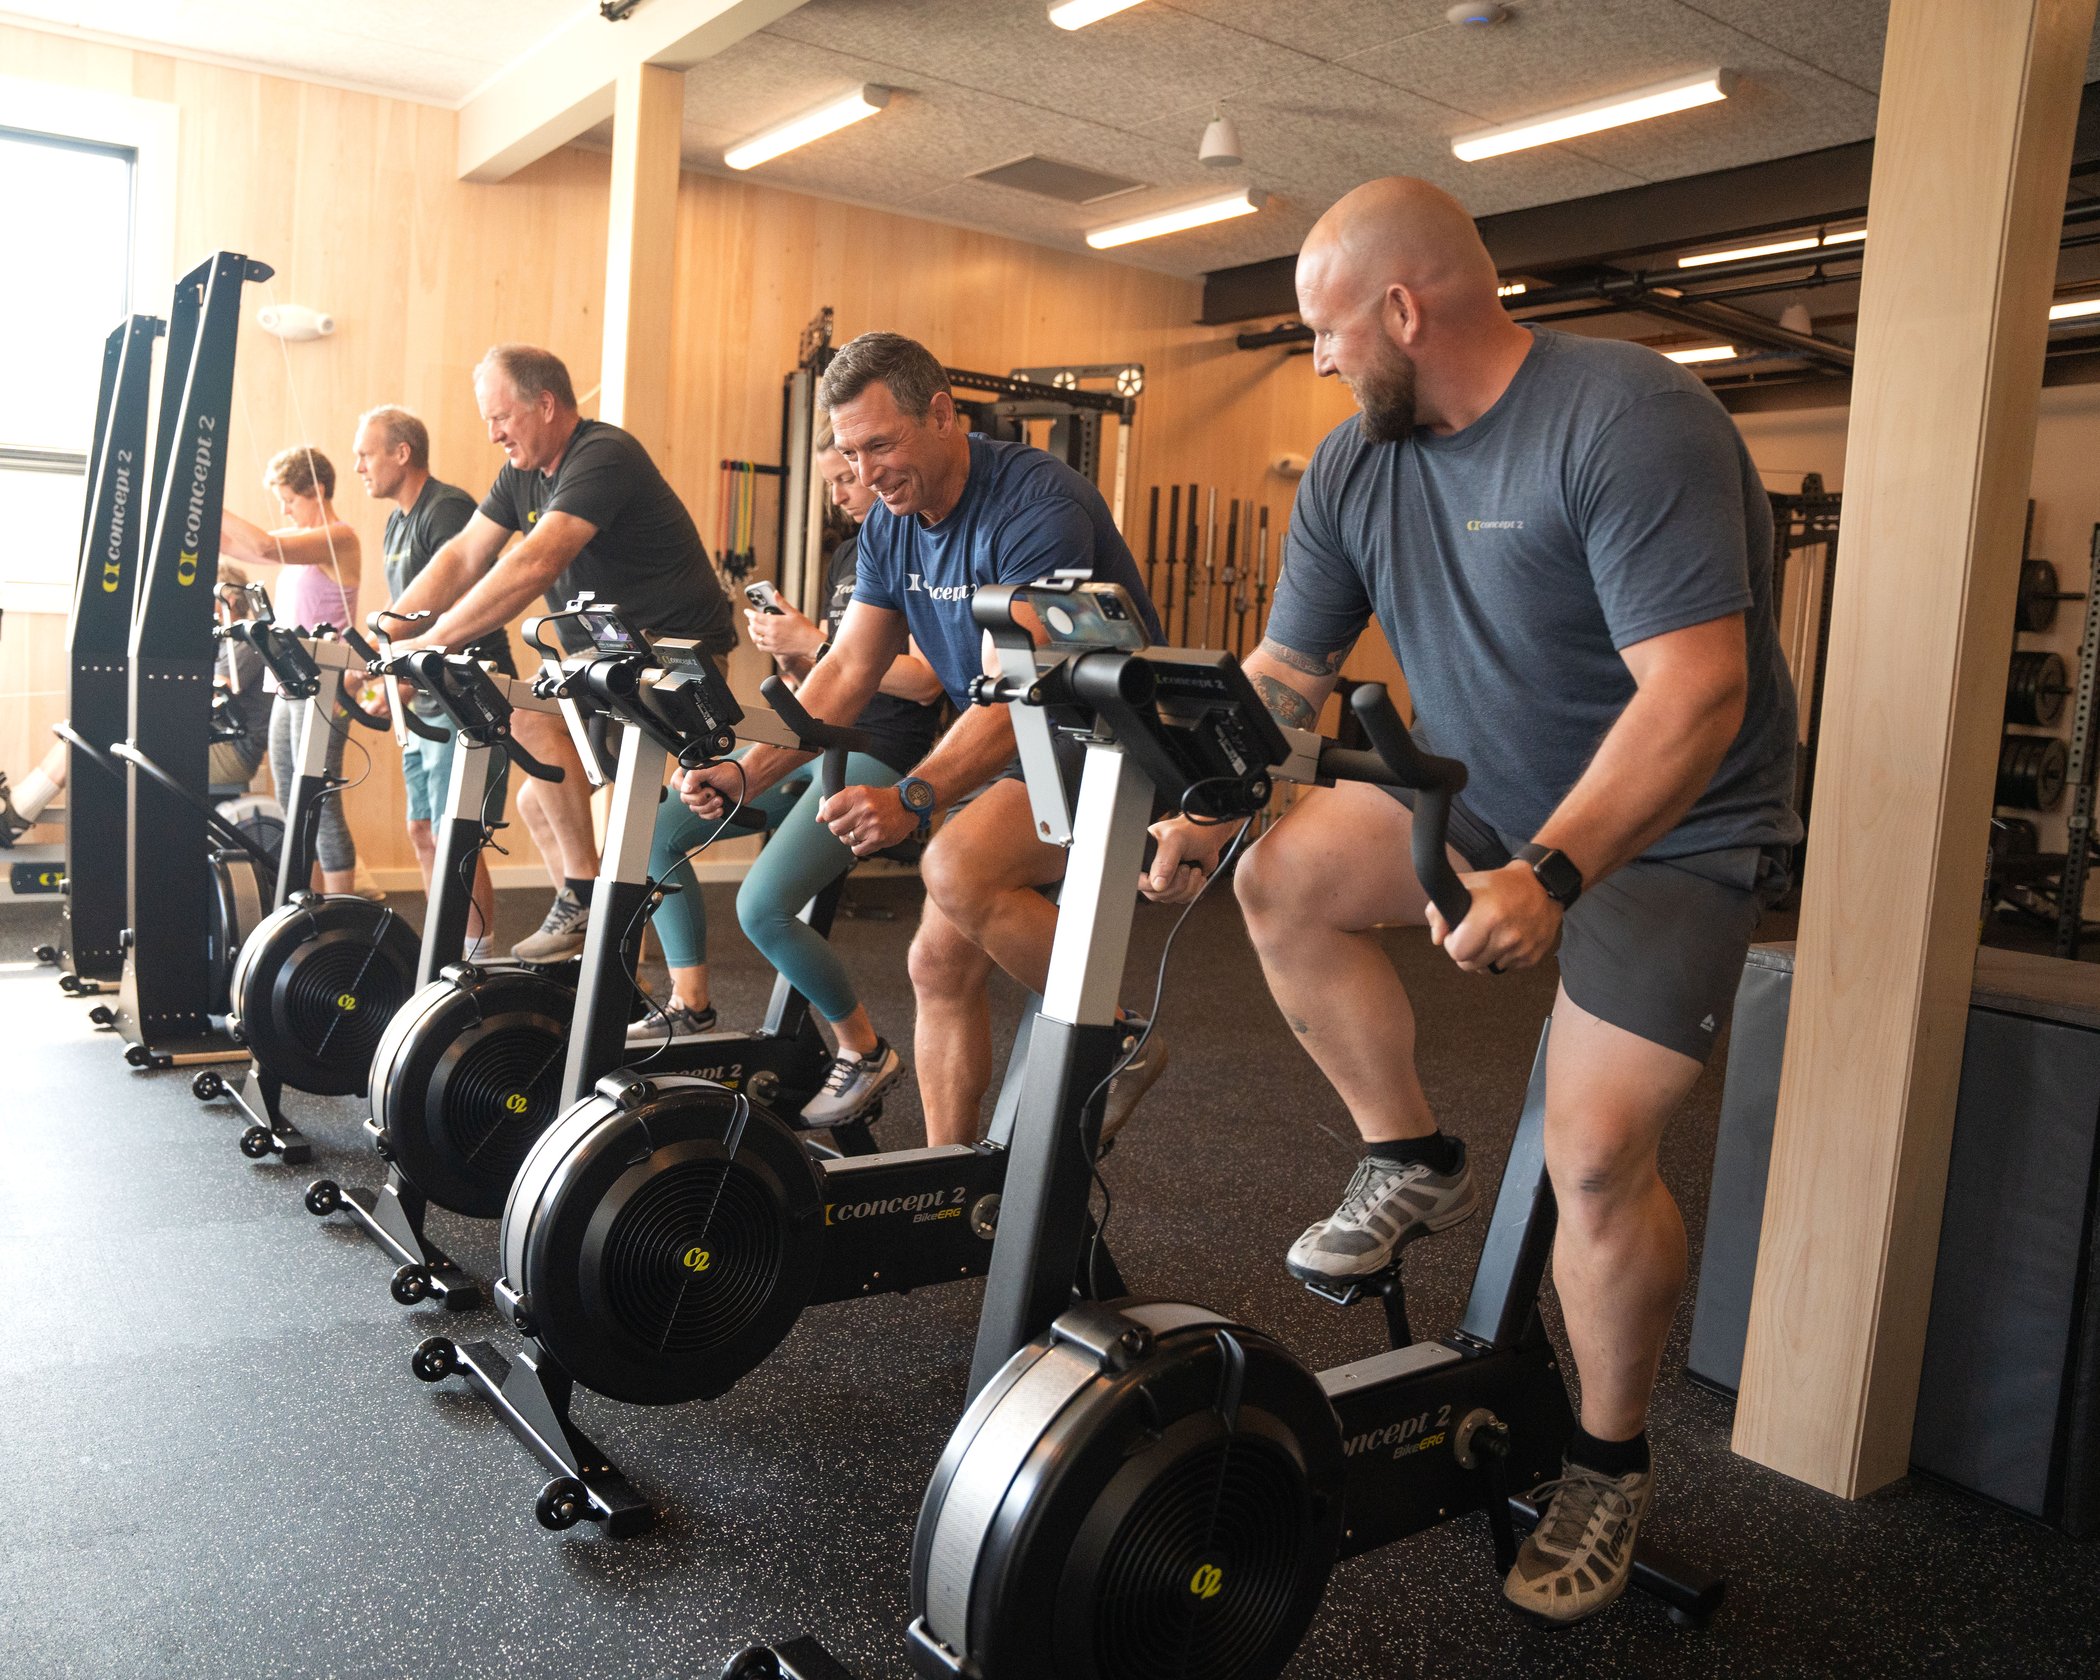 A group of people working out on SkiErgs and BikeErgs in a gym